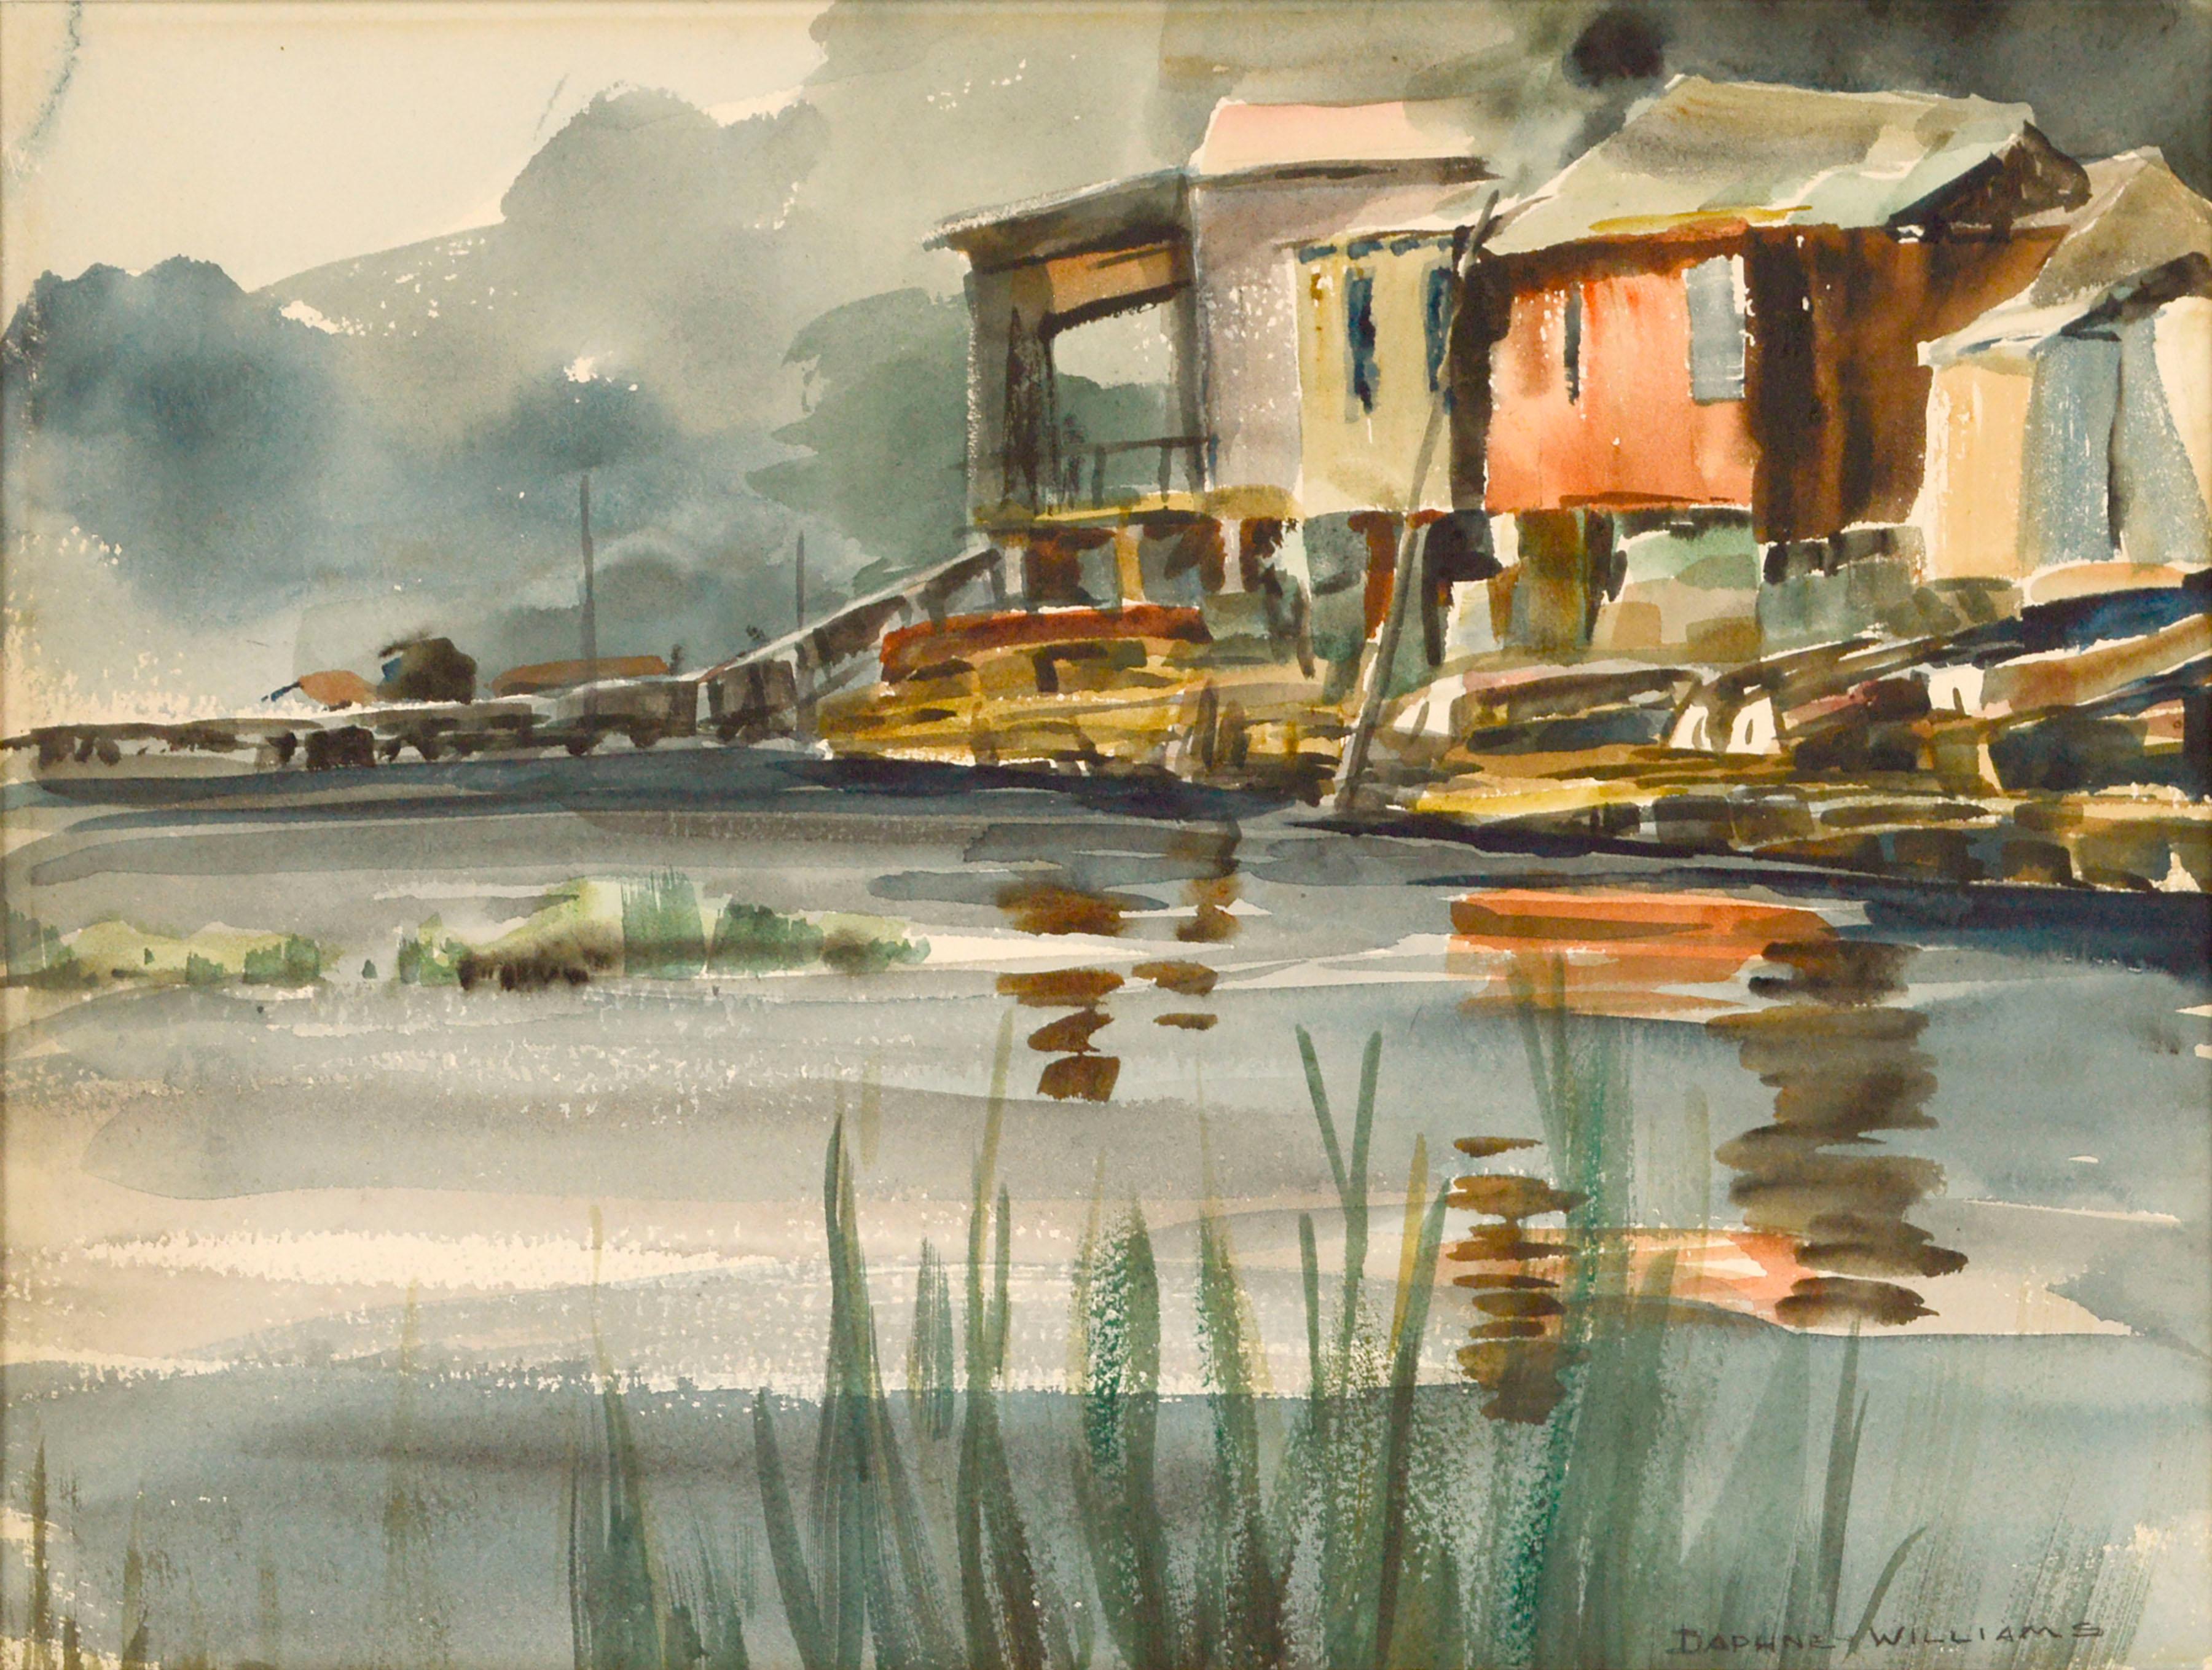 Dock over Water Landscape  - Art by Daphne Williams